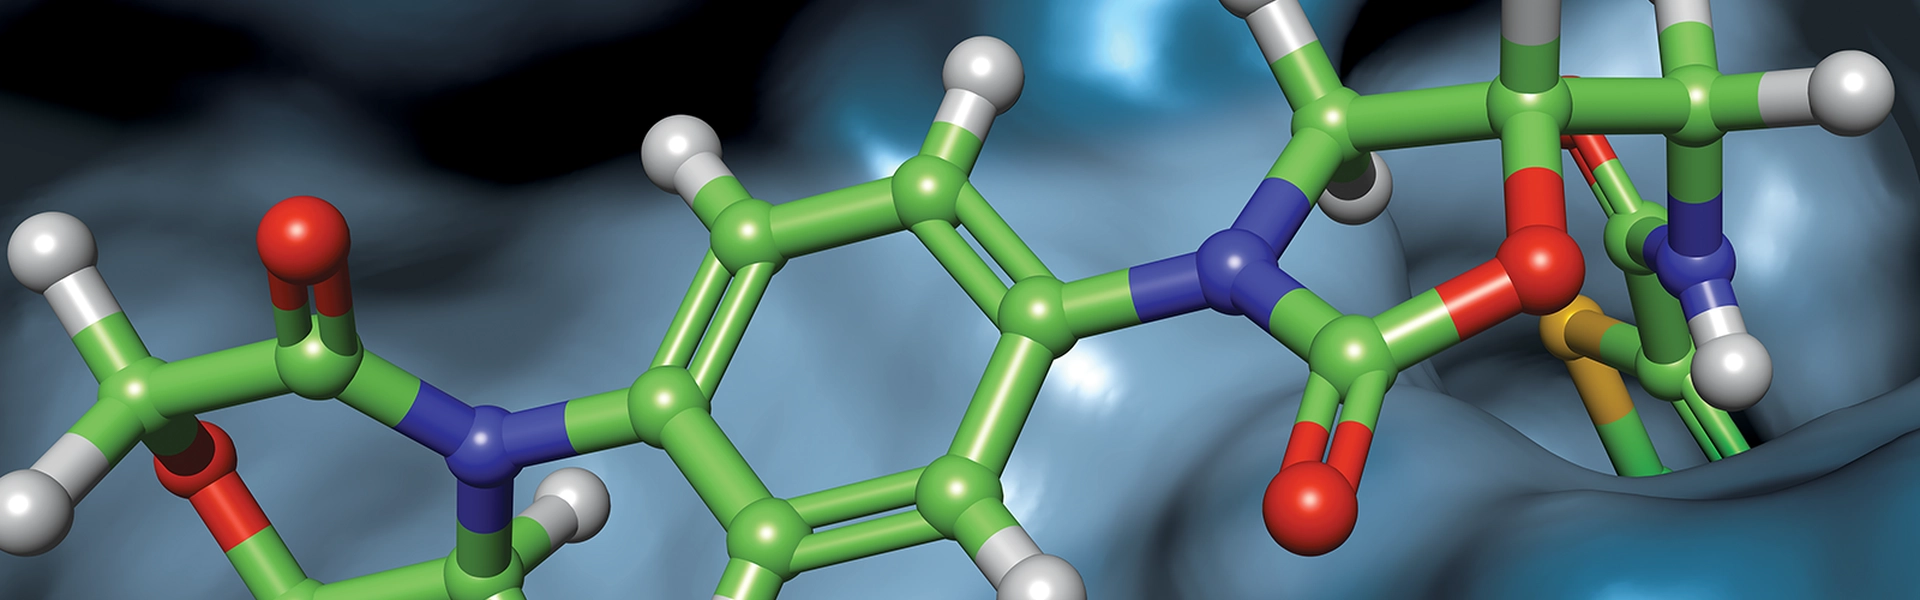 Molecular structure graphic from CADD software platform, Flare